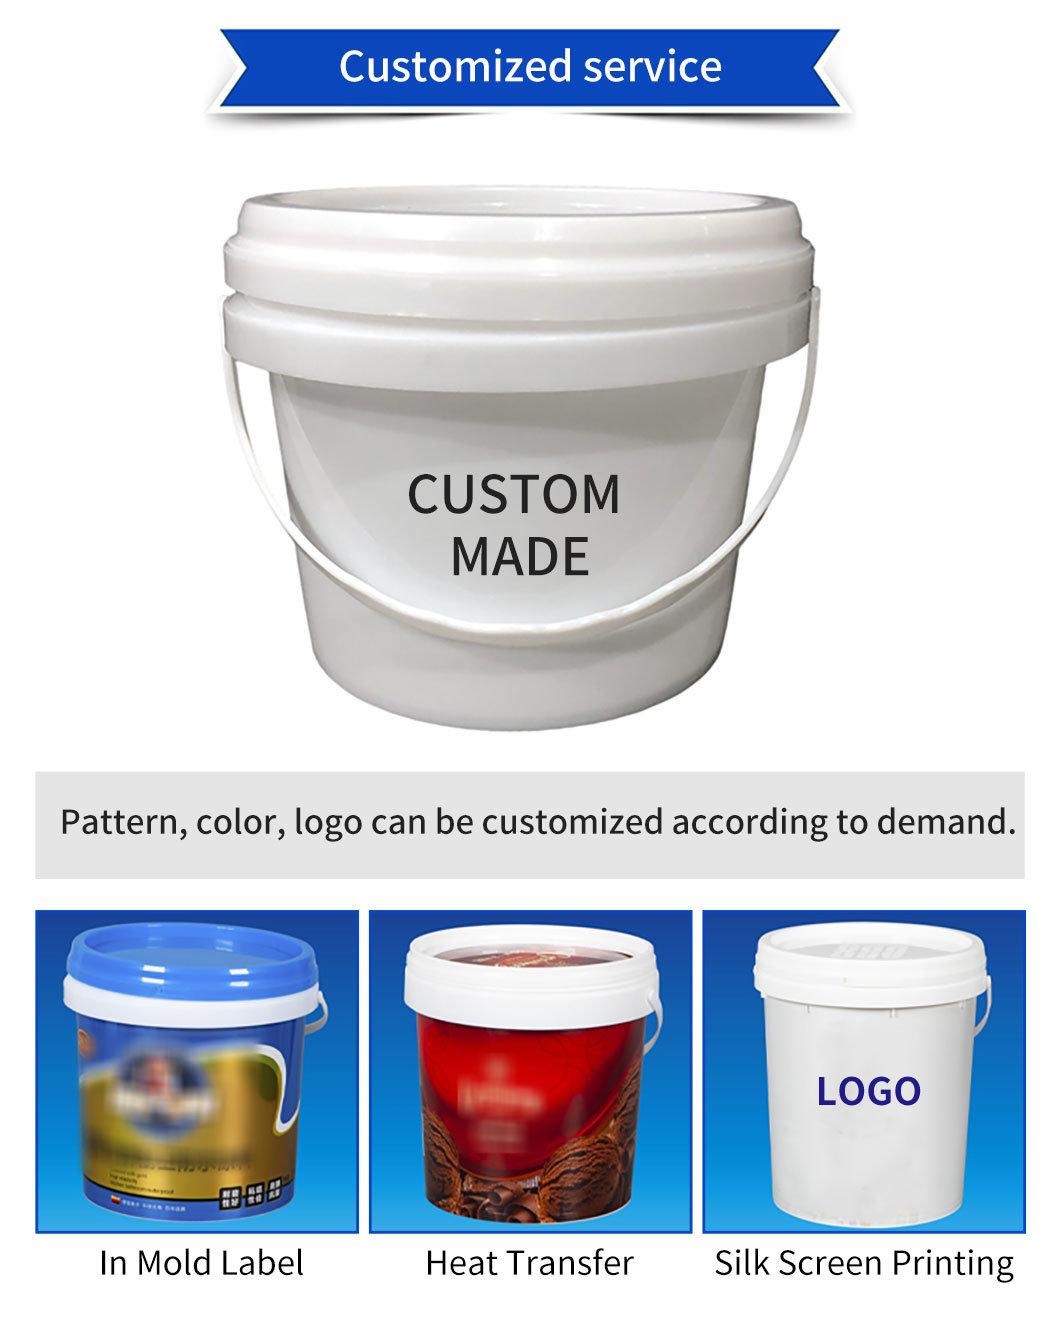 Customized Printing Food Grade Plastic Bucket Pail with Lid and Handle for Seafood Oil Paint